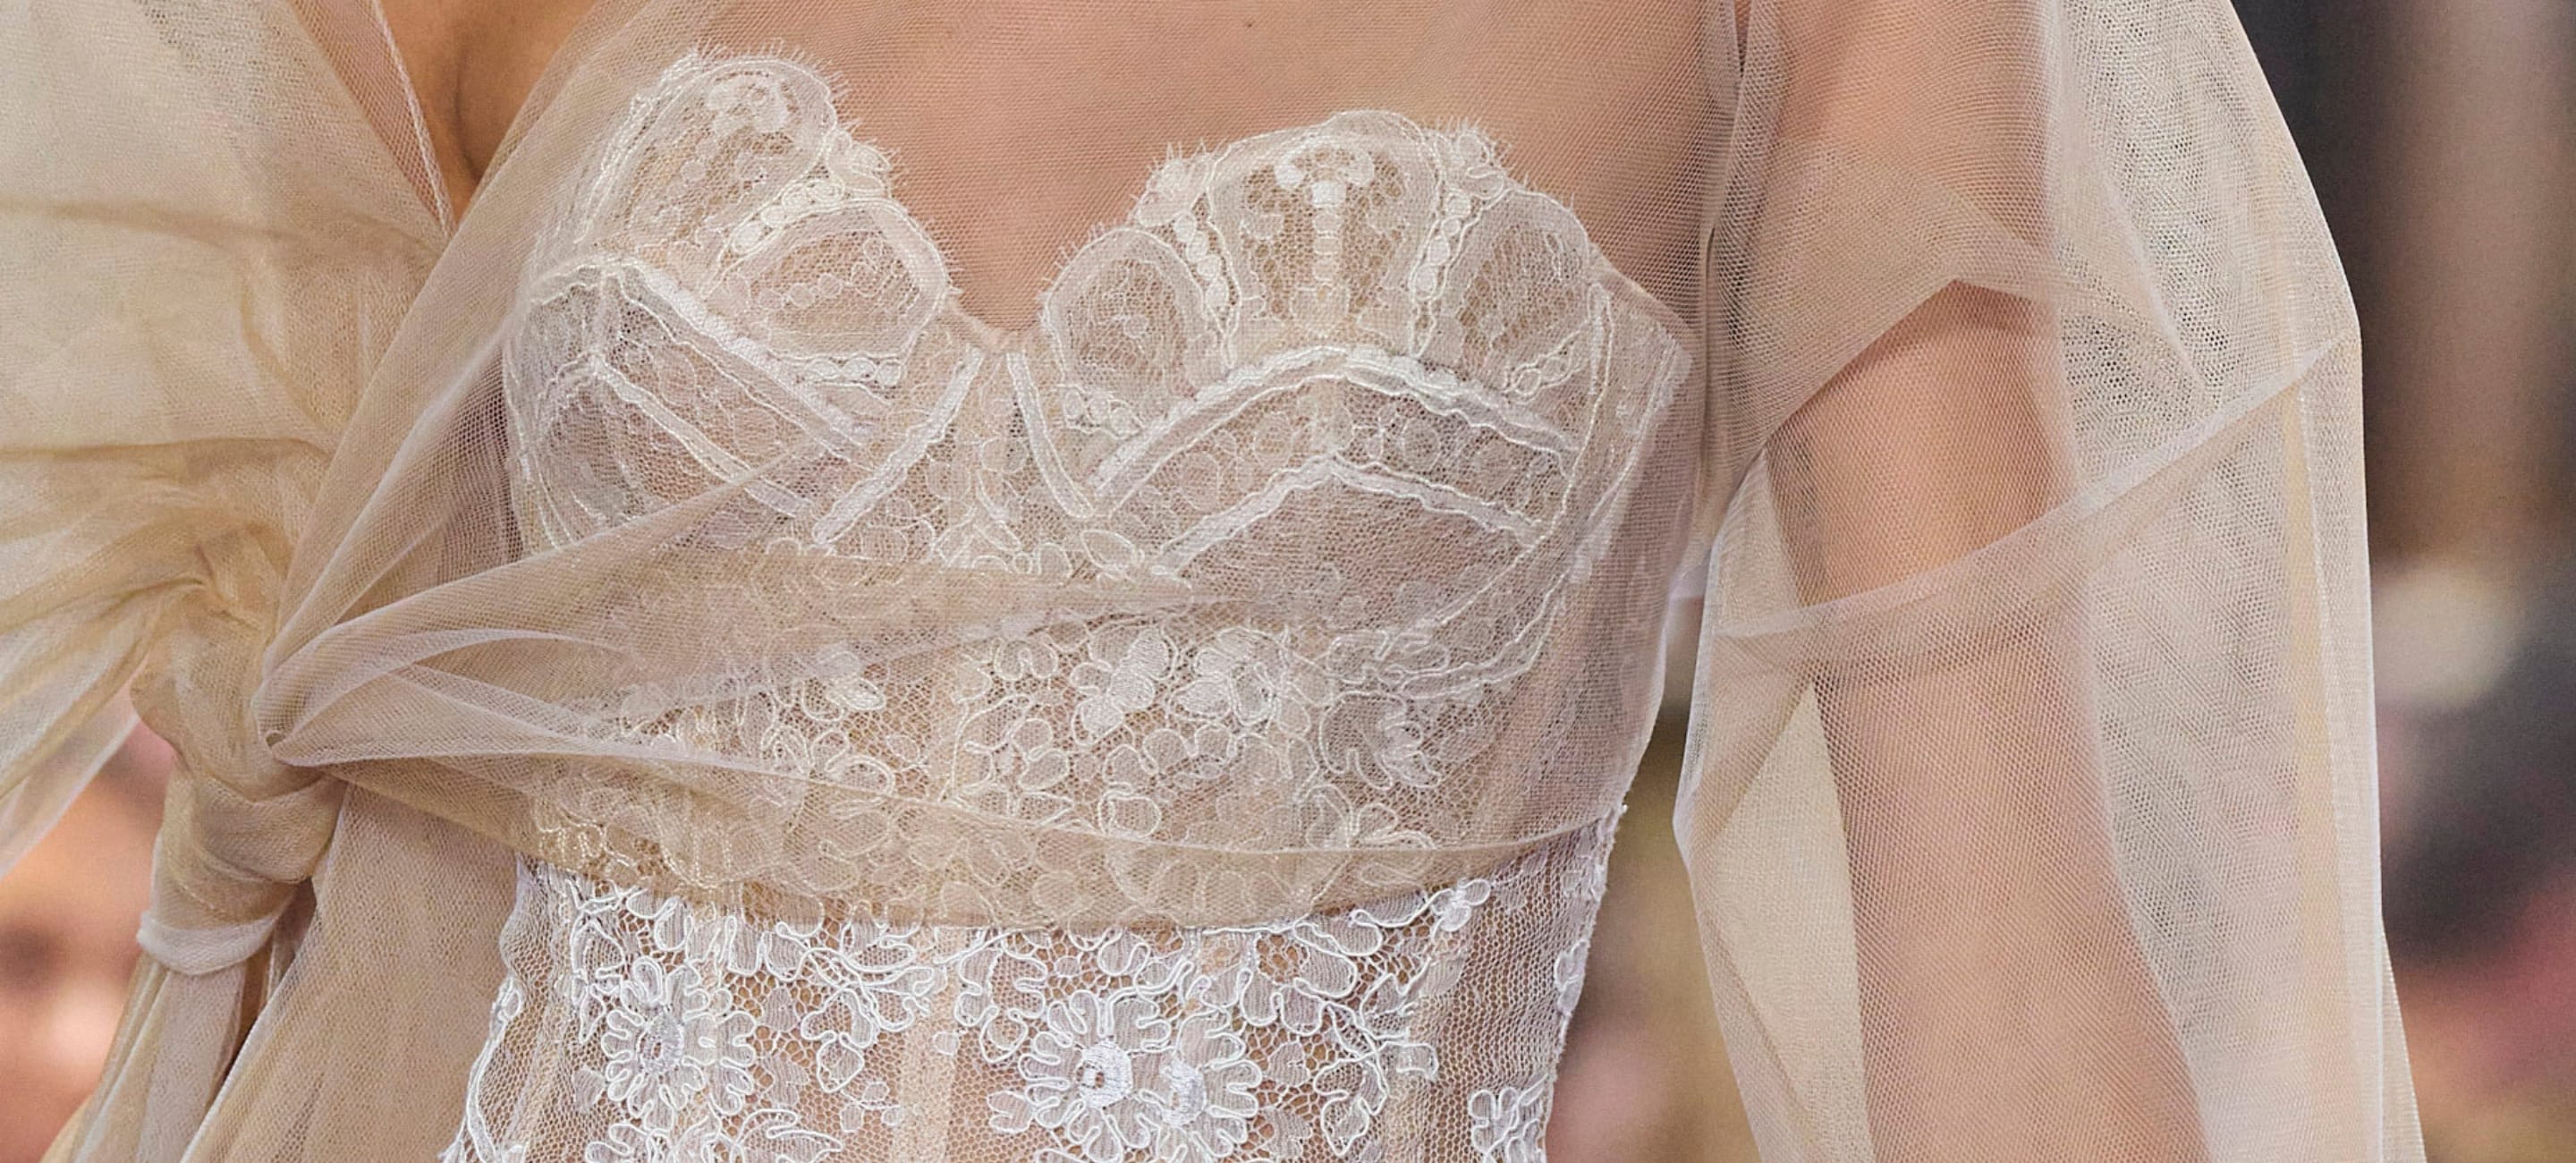 How a Luxury Lingerie Brand Designs a Custom Embroidery